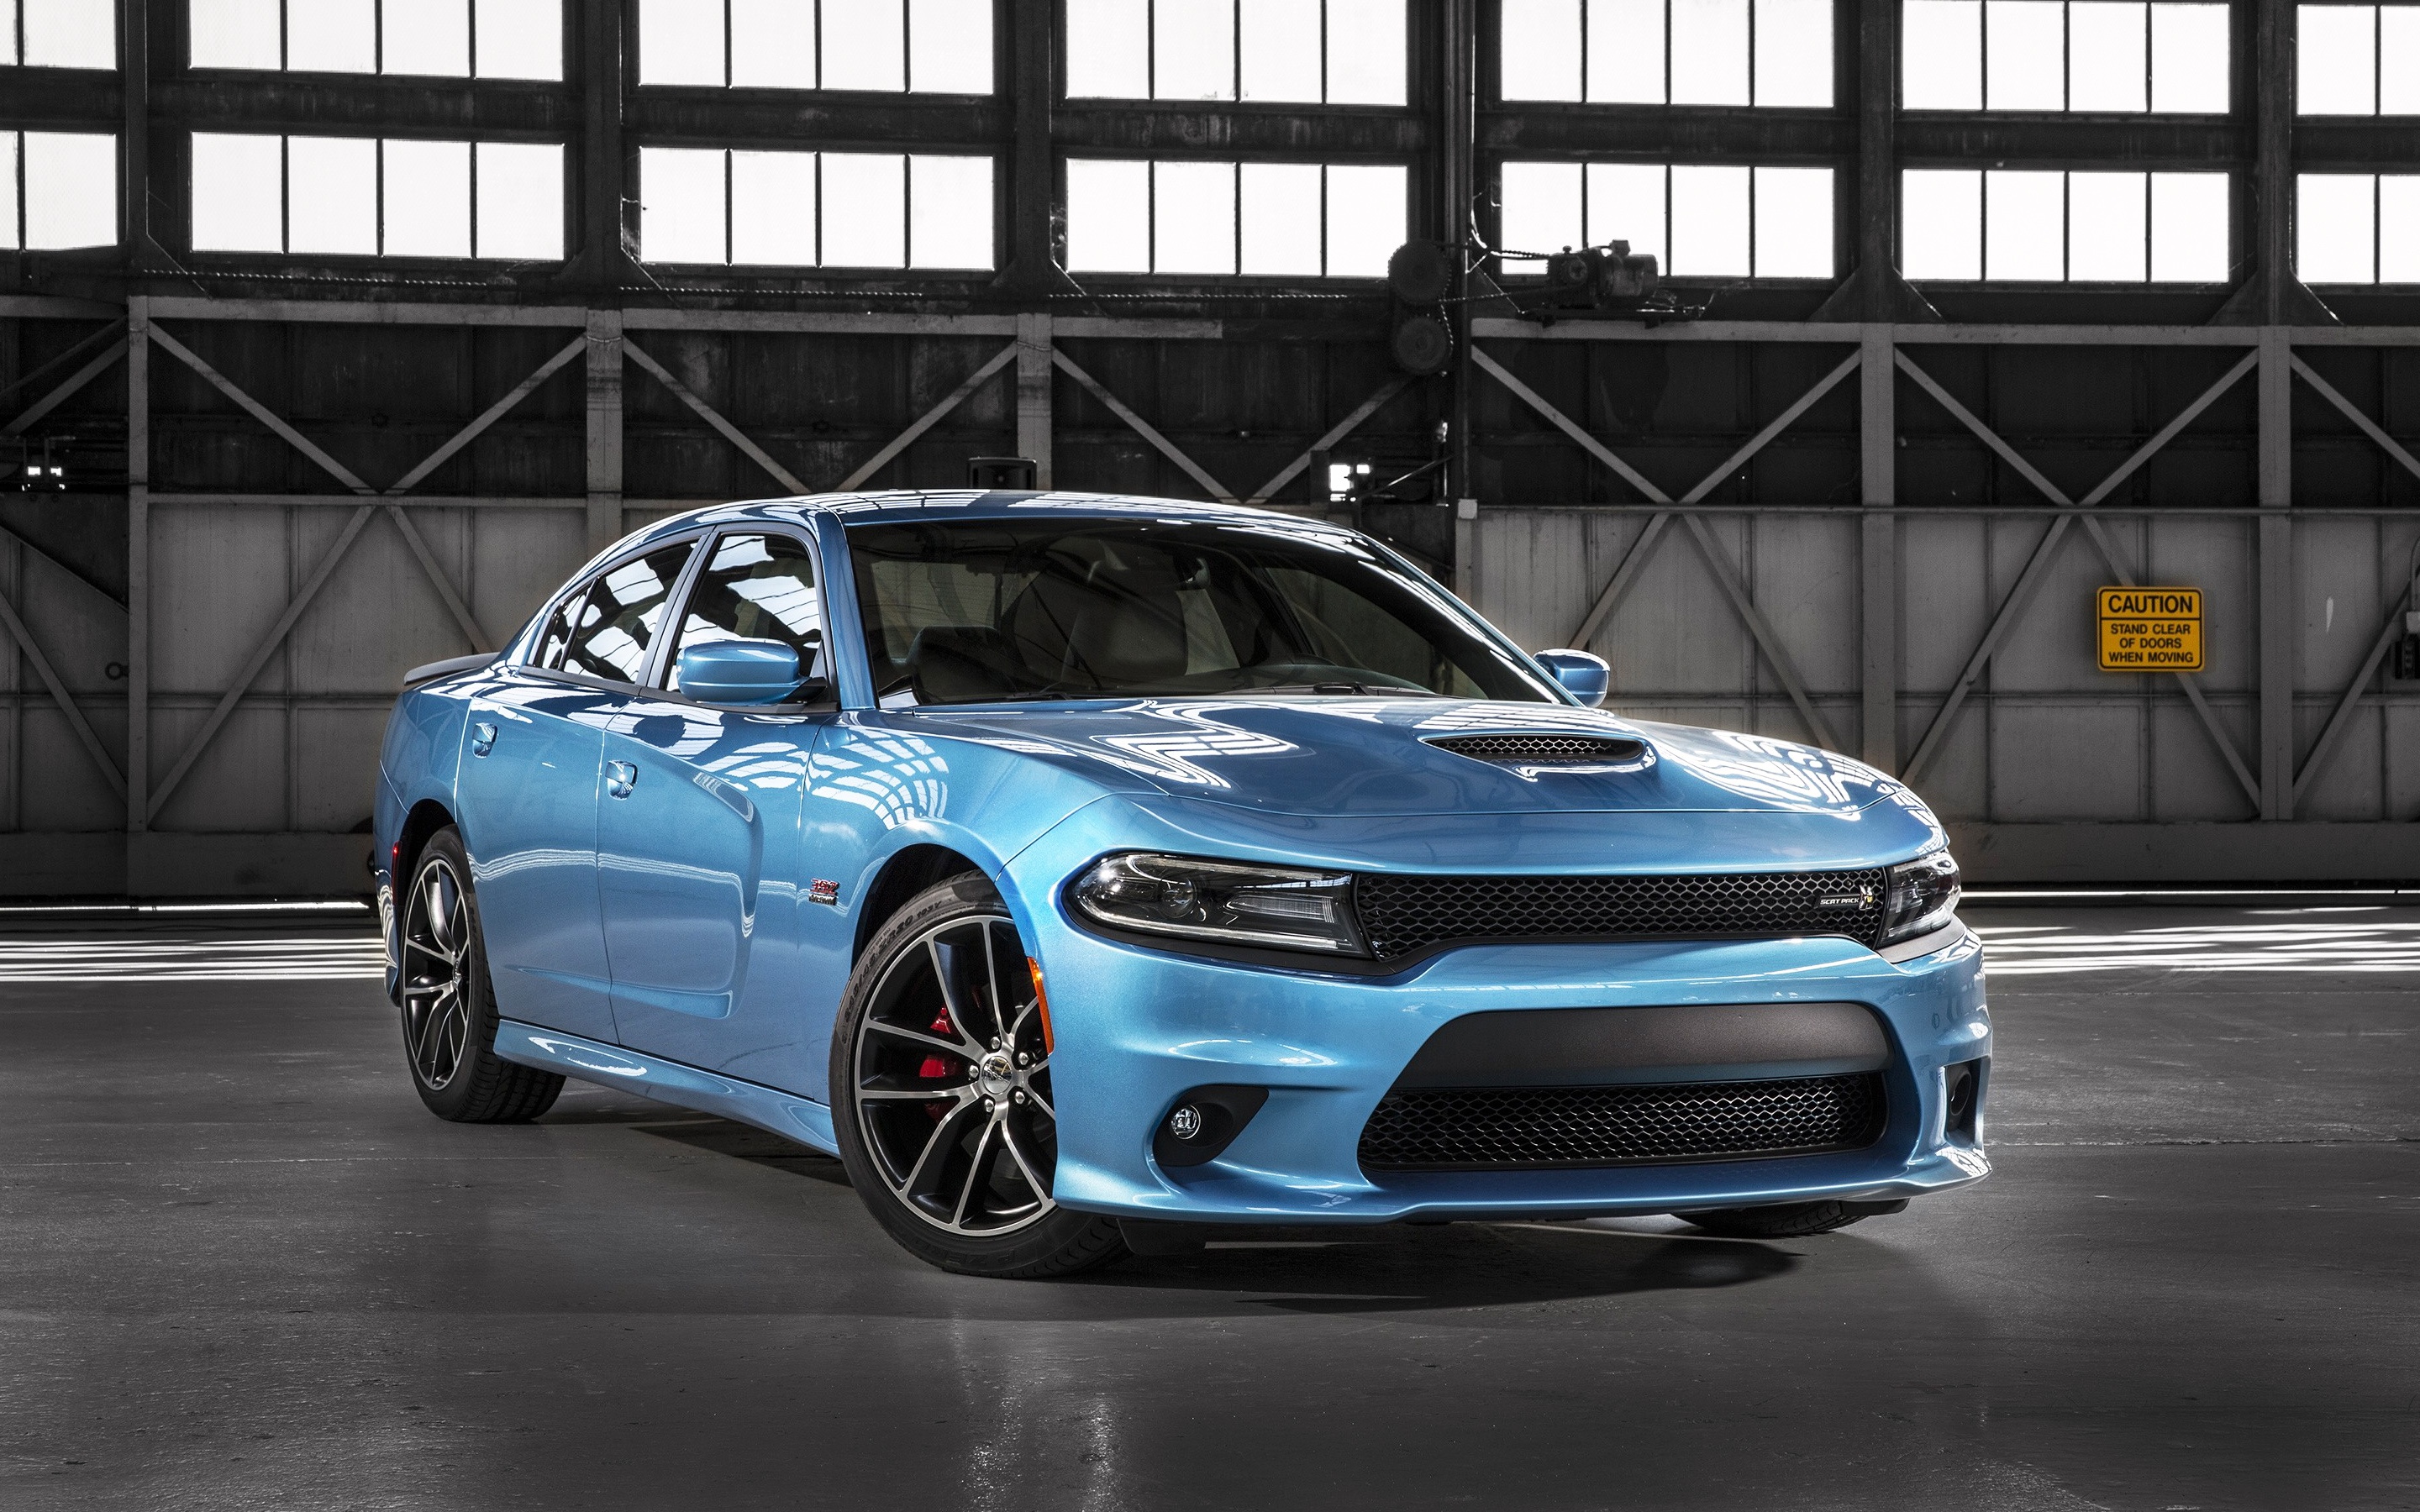 Dodge Charger Rt Scat Pack - Dodge Charger Scat Pack - HD Wallpaper 